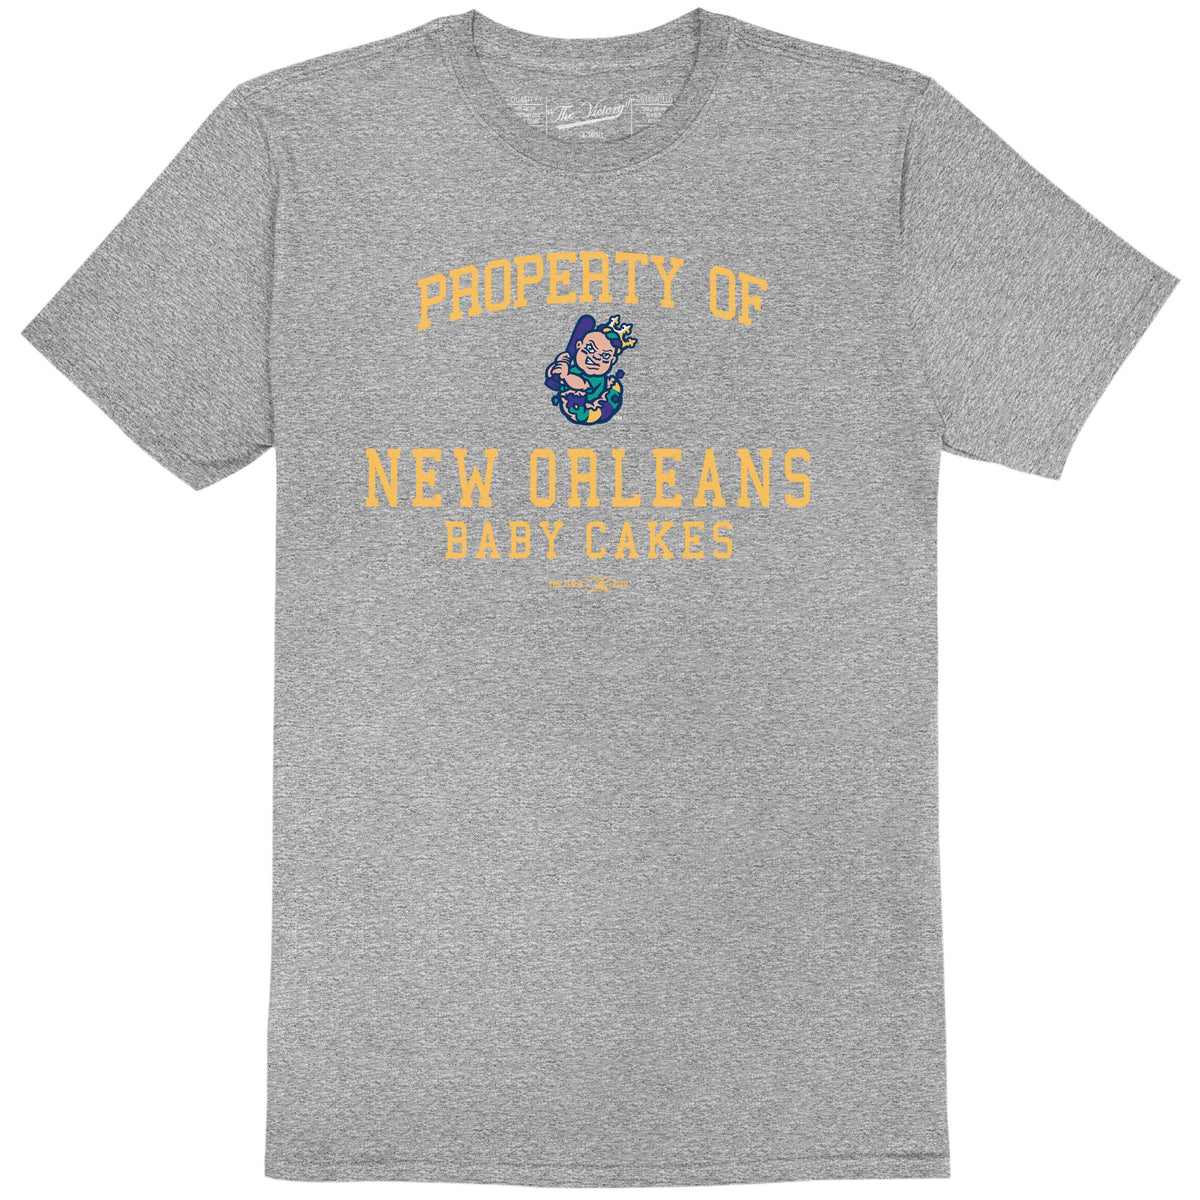 New Orleans Baby Cakes 100% Cotton Tee